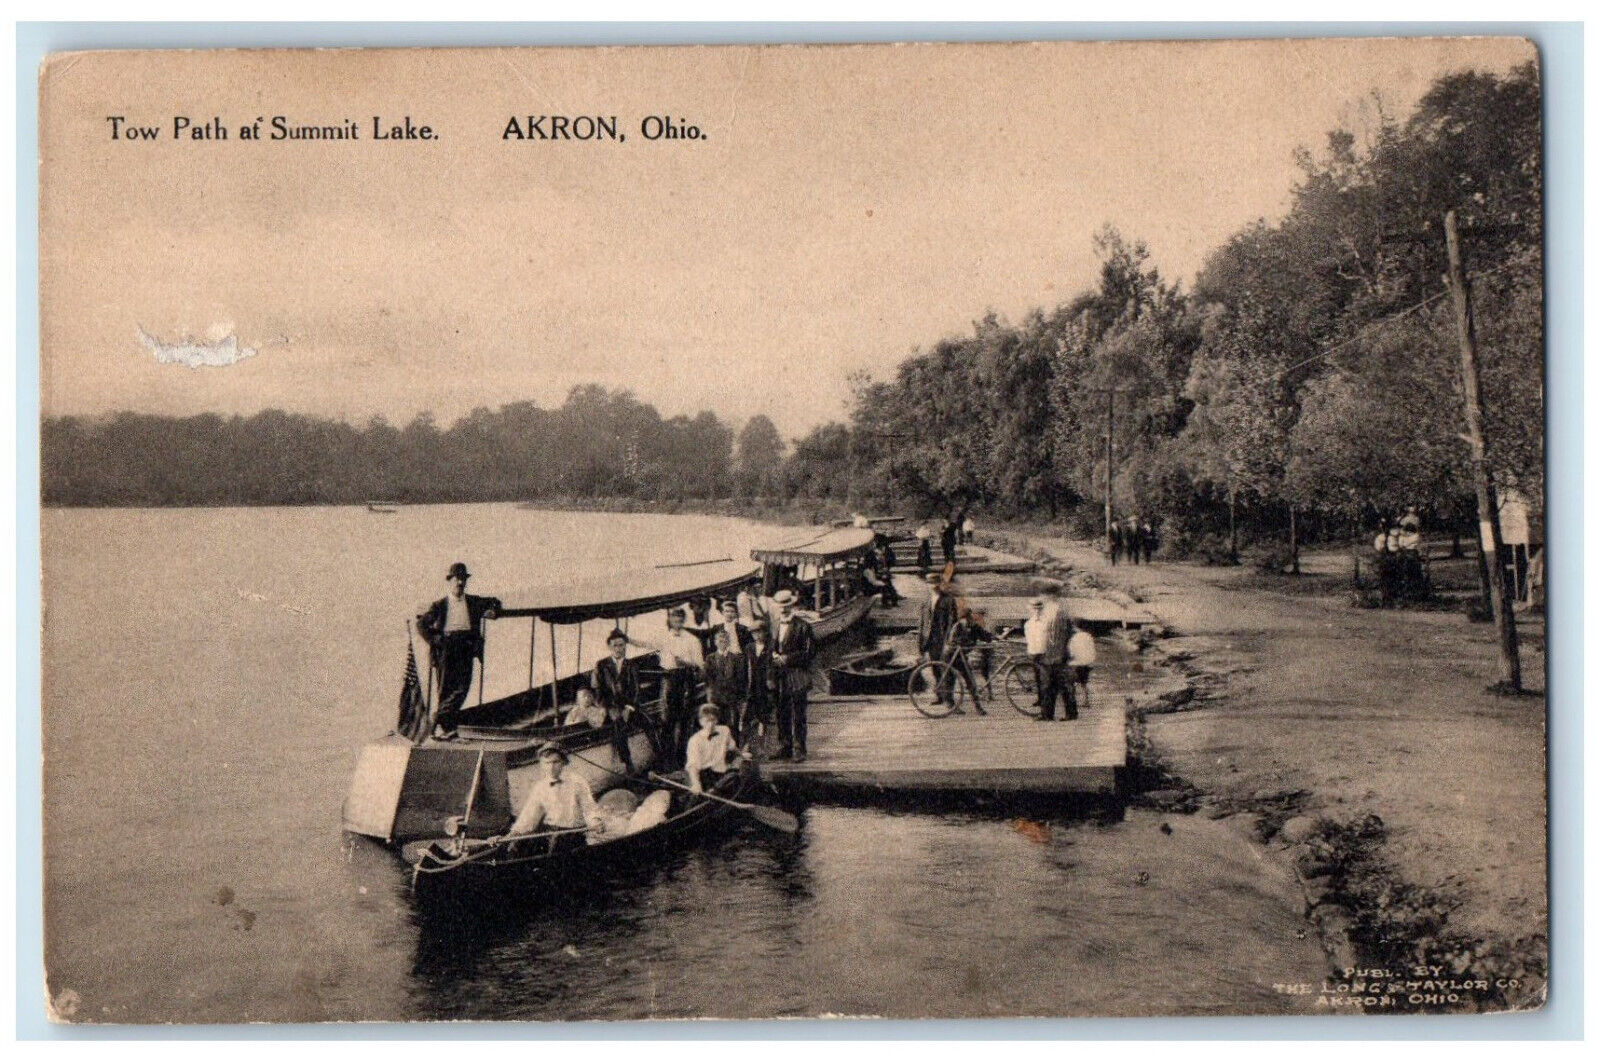 1914 Boating Scene Tow Path at Summit Lake Akron Ohio OH Antique Postcard